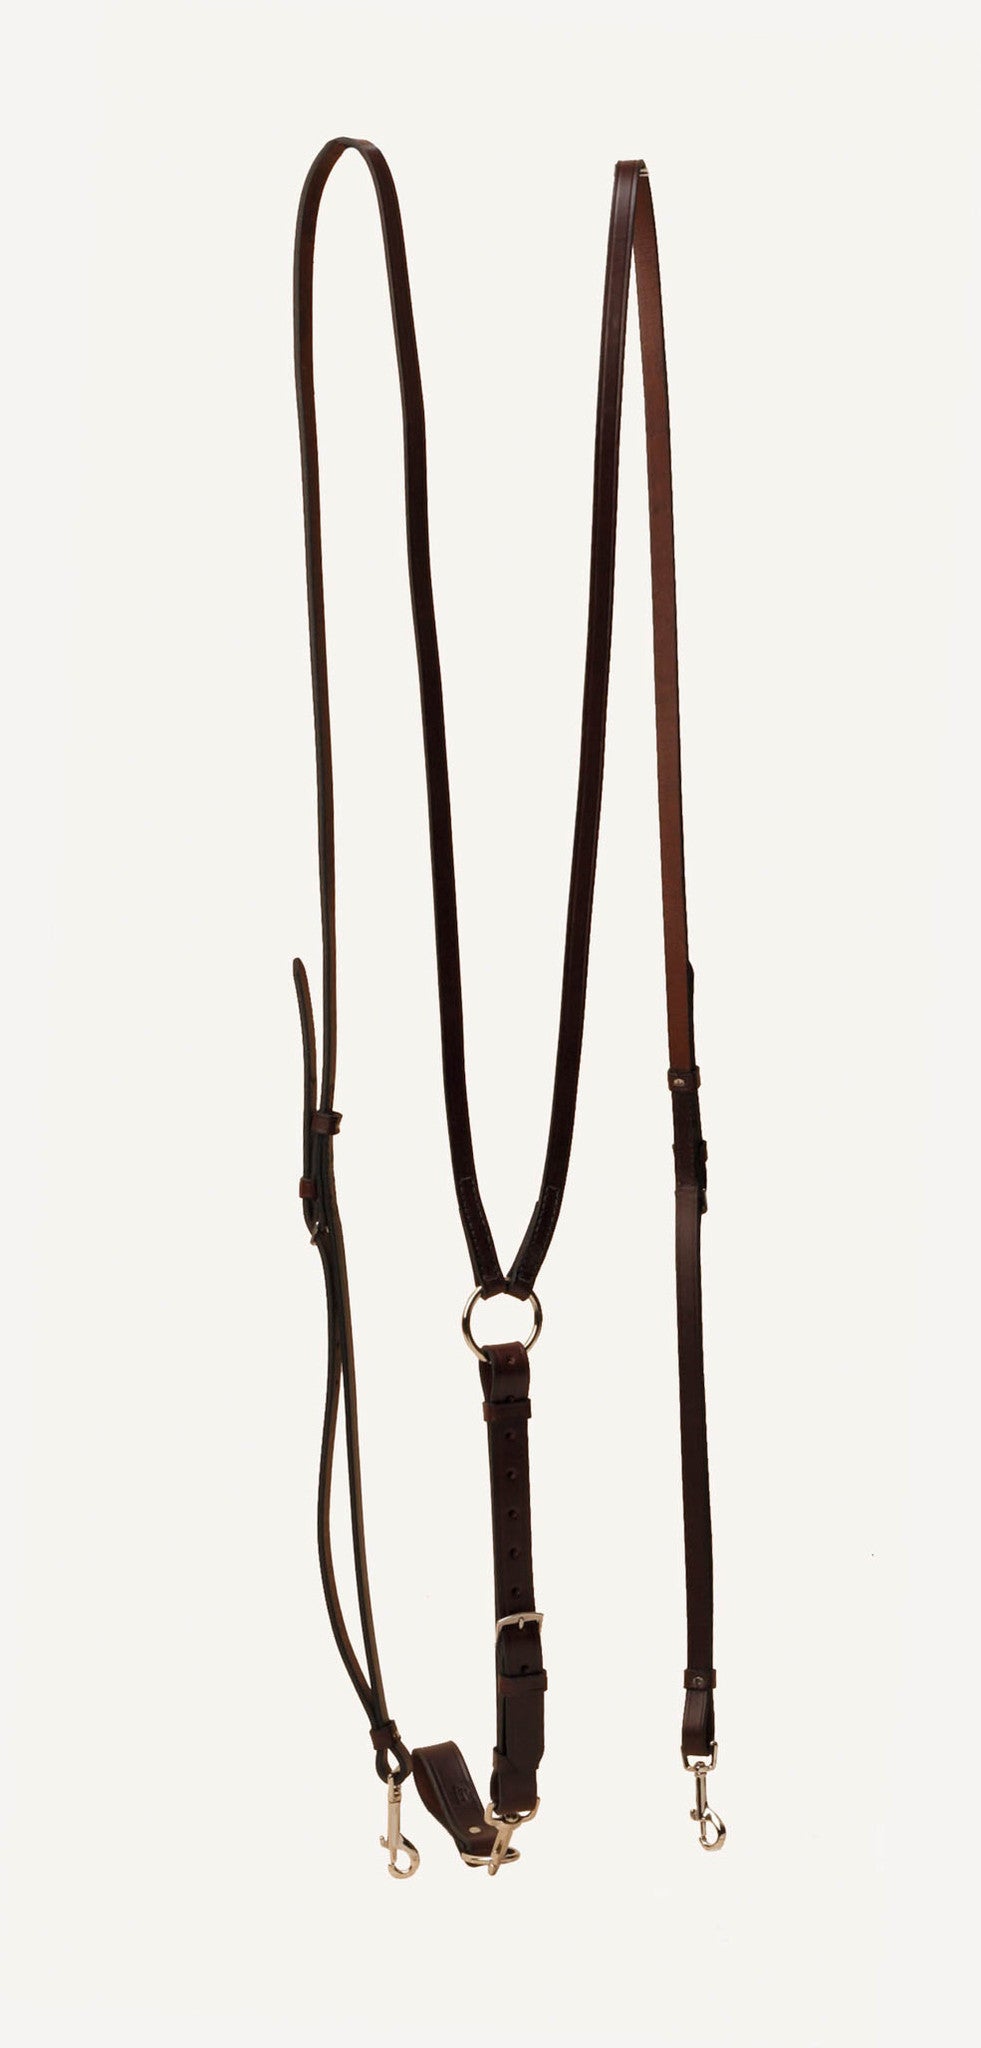 Tory Leather Vienna Side Reins